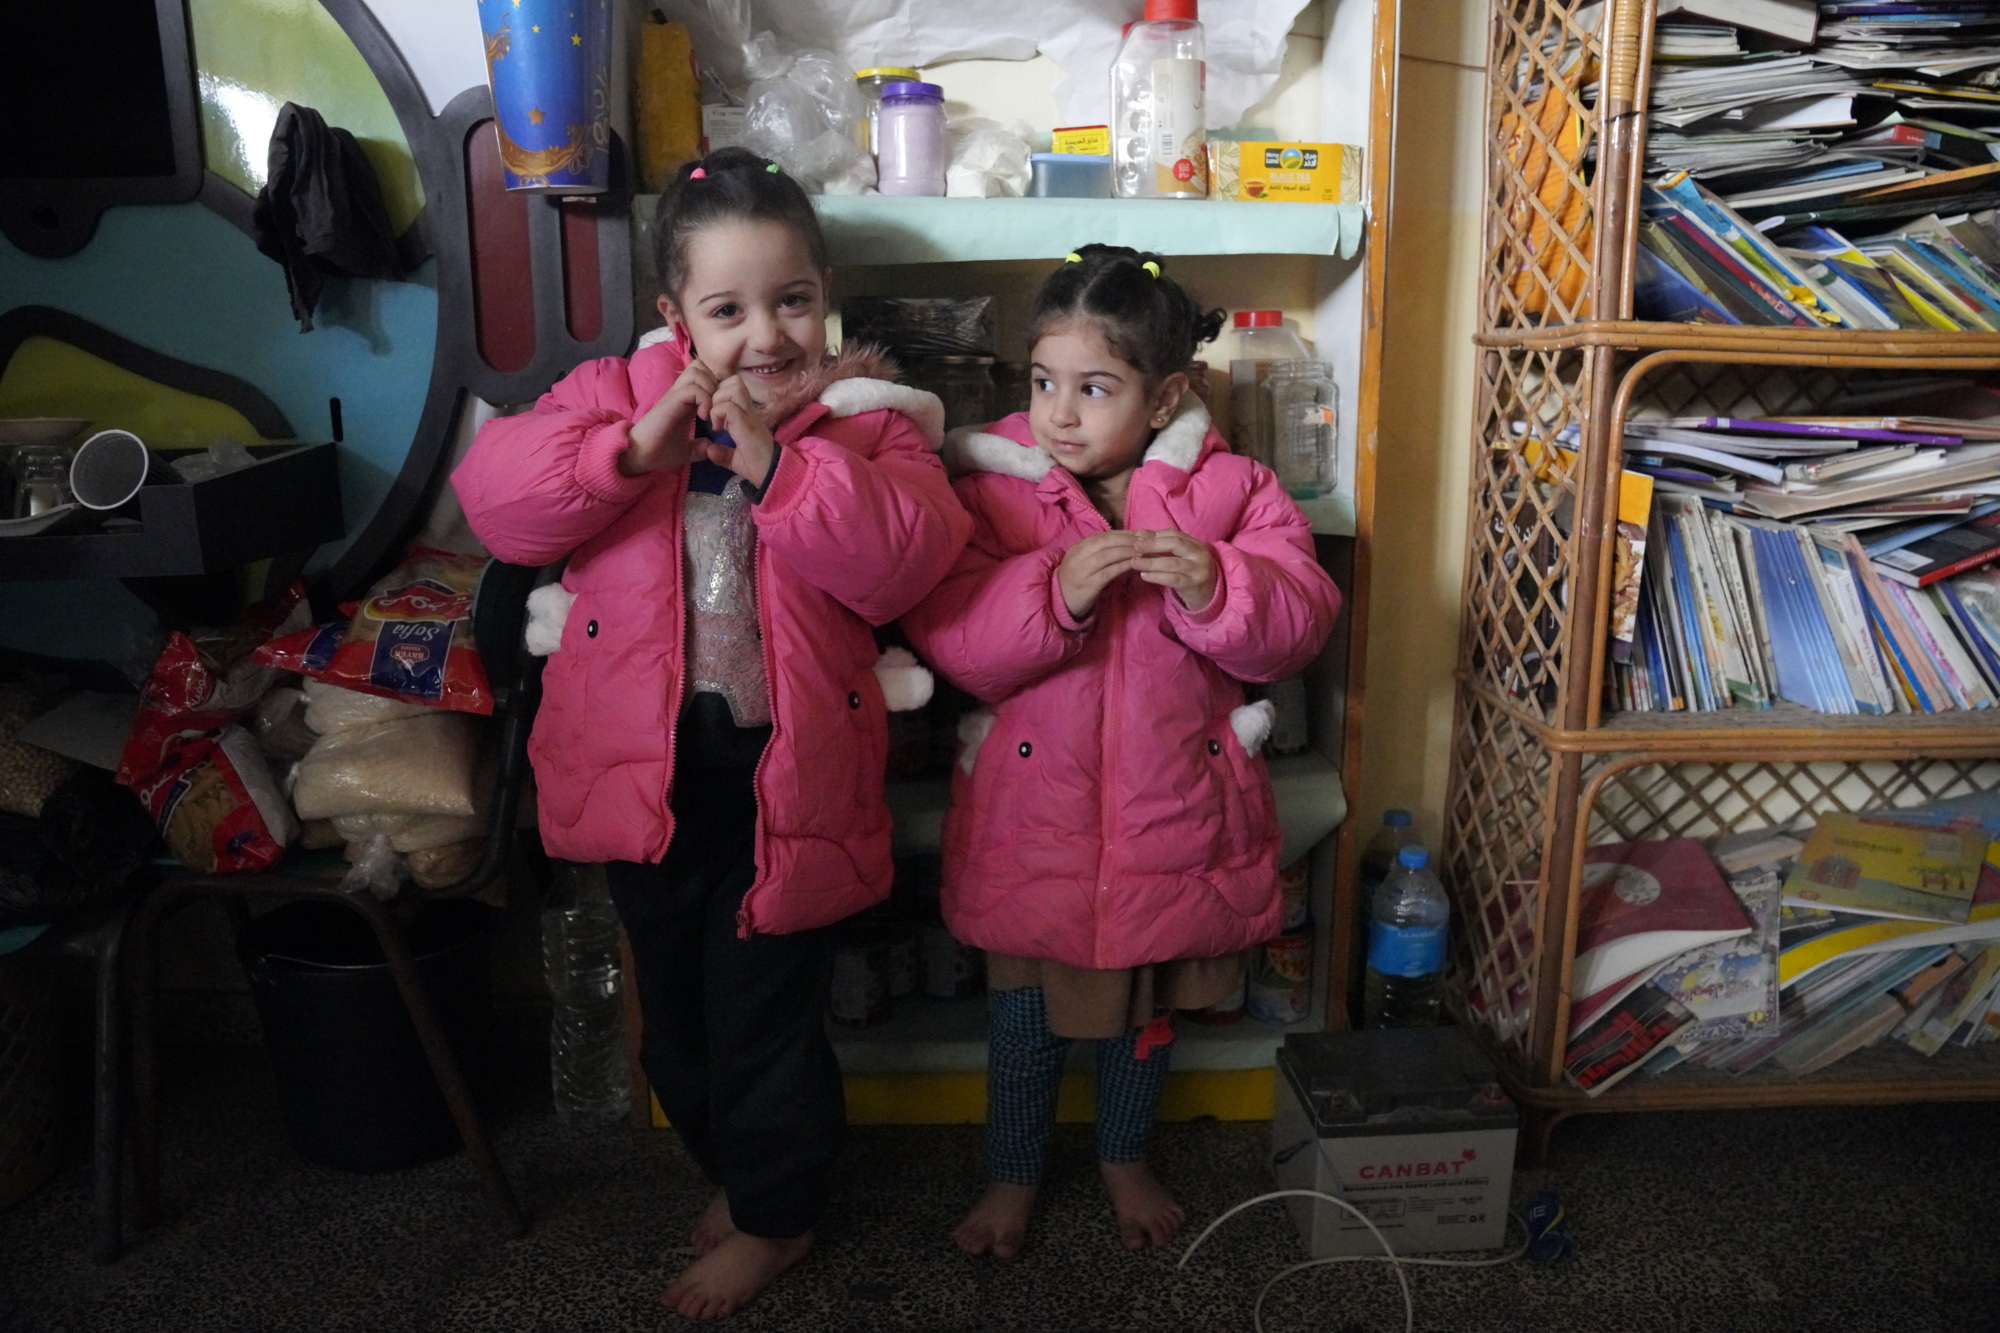 Four-year-old Jalila and three-year-old Suha in warm winter jackets at a women's centre in Gaza that is being used as a shelter (UNICEF/Ingram)